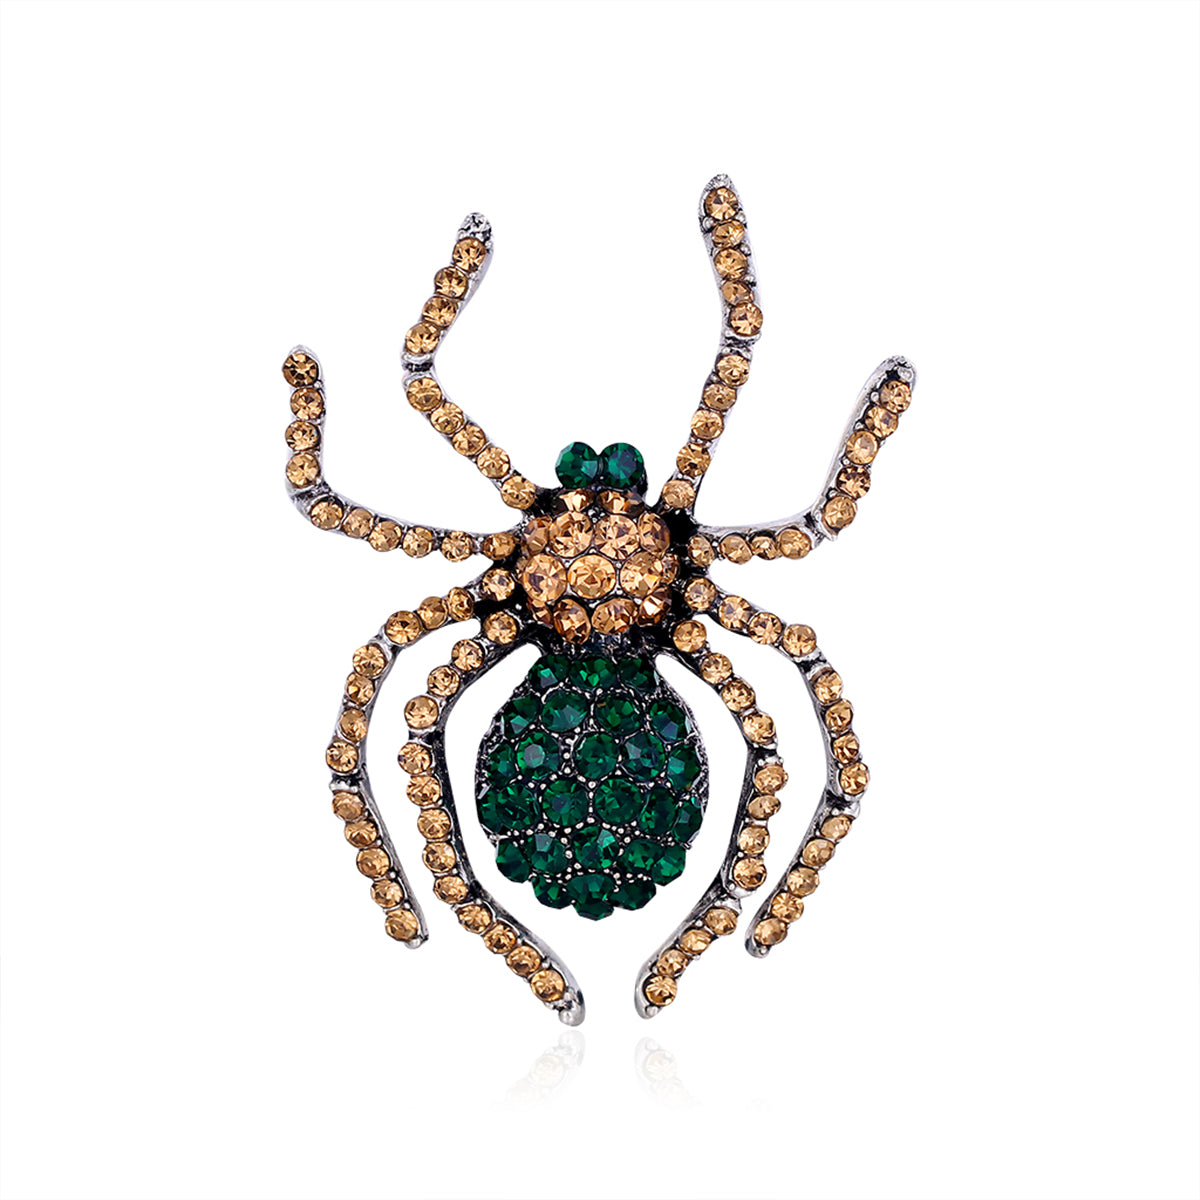 Green Cubic Zirconia & Silver-Plated Spider Brooch